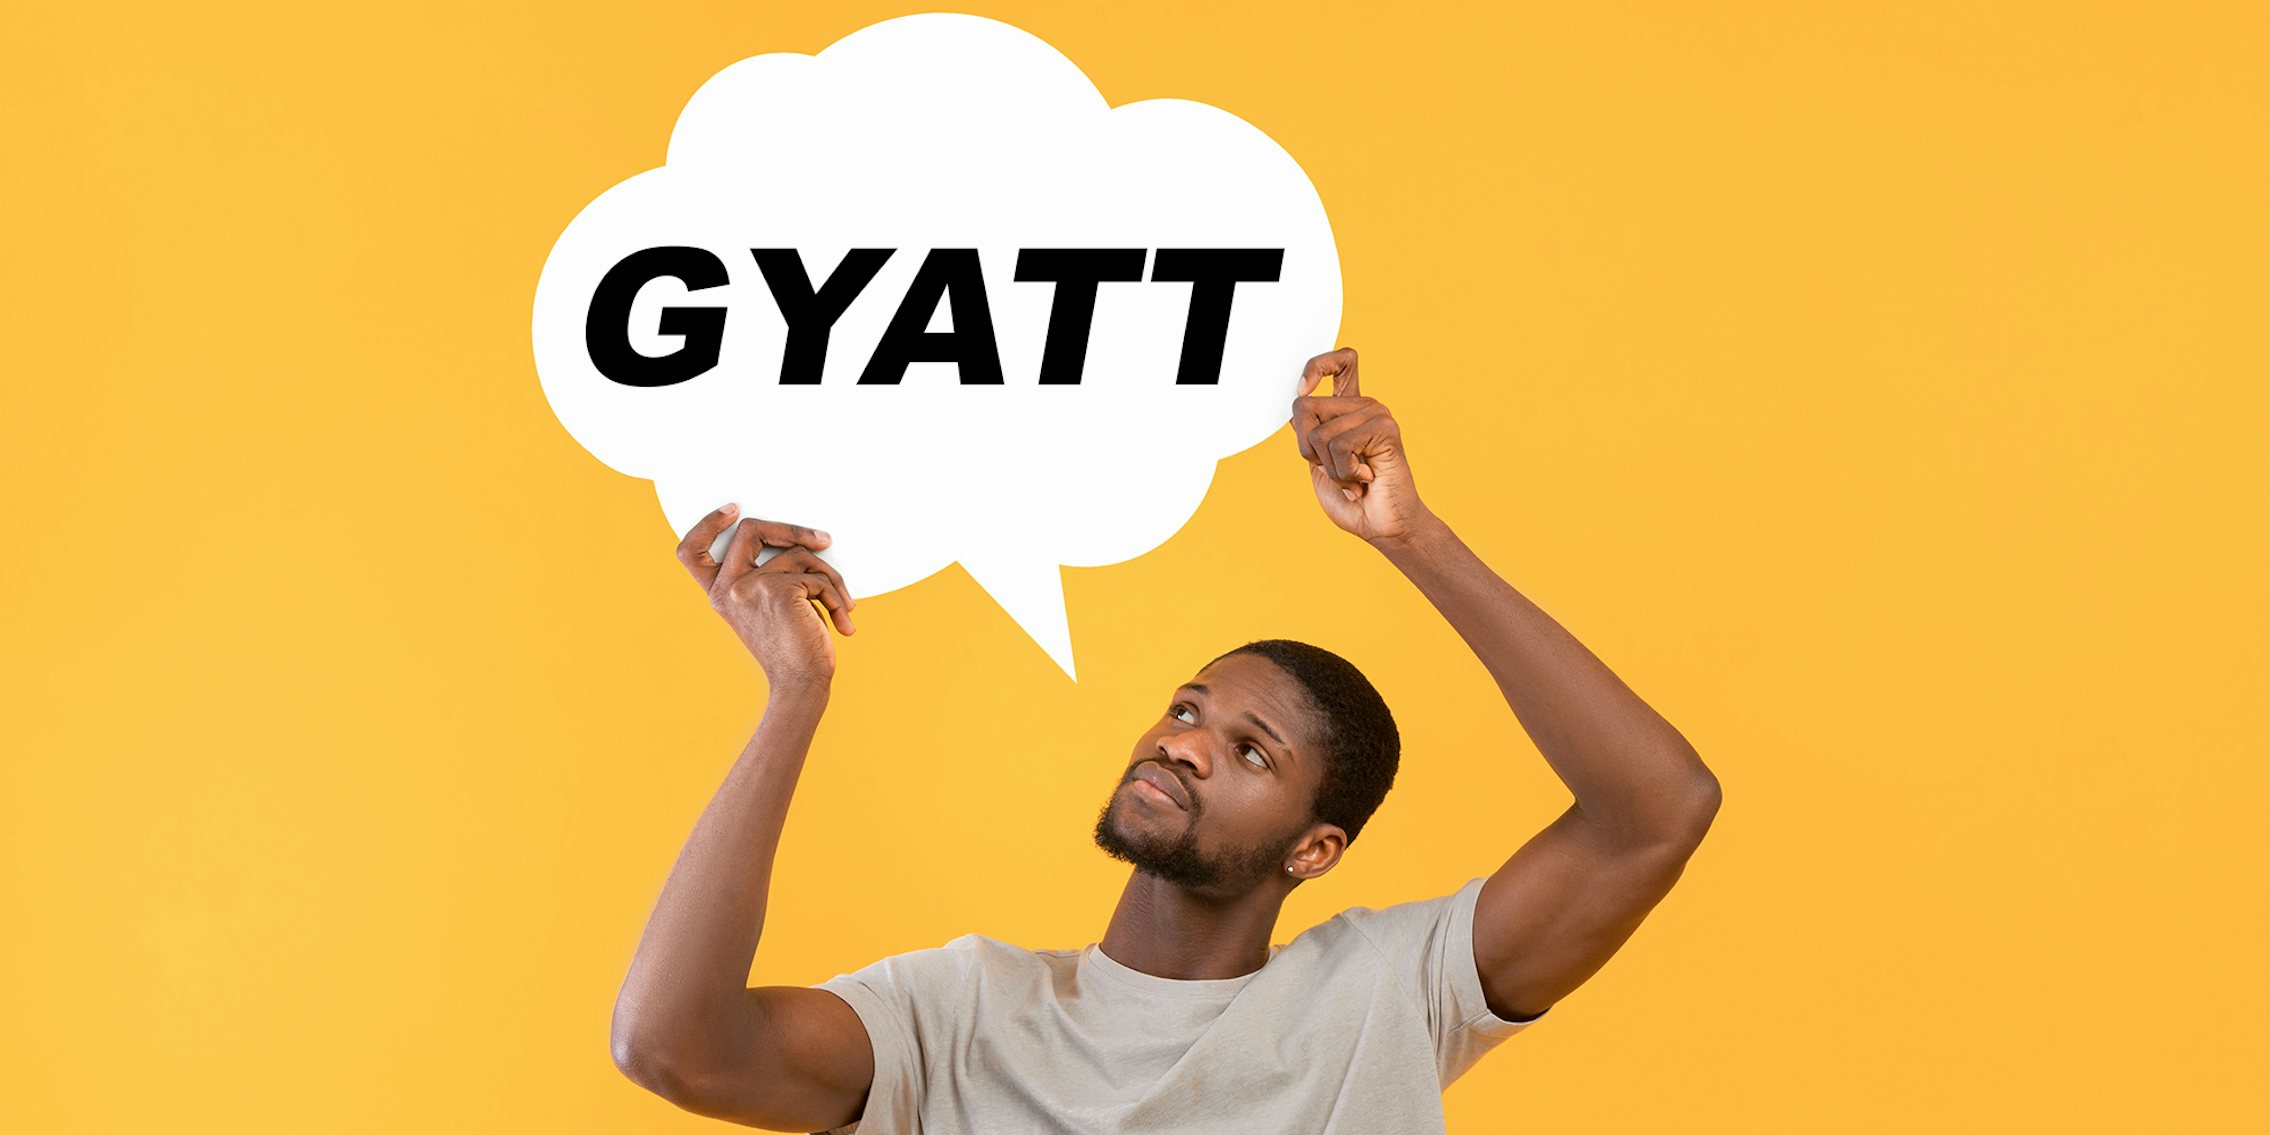 Gyatt Meaning What Does the Popular TikTok Phrase Mean?